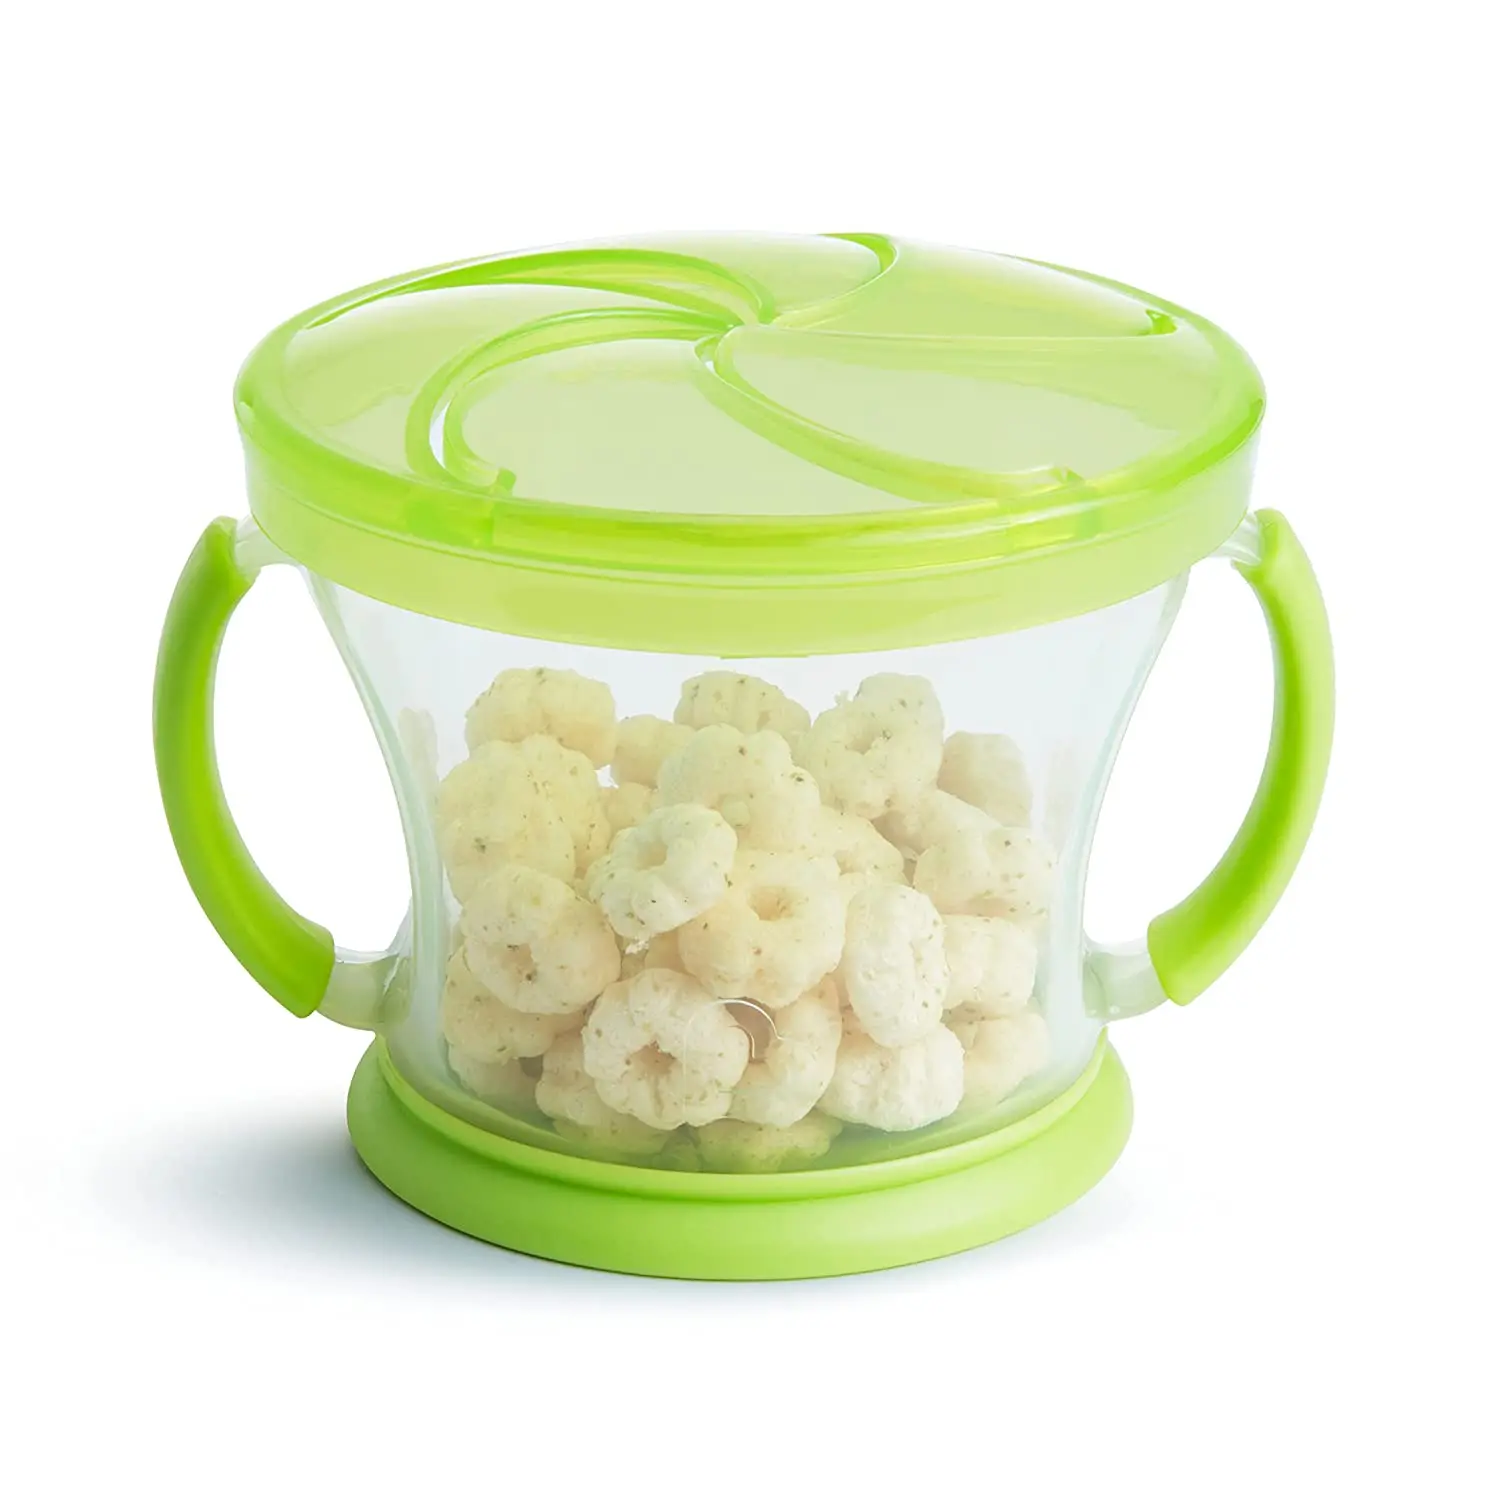 Snack Cups for Toddlers Snack Containers Baby Treat Catcher with Lid Food Container Dishwasher Safe and BPA Free